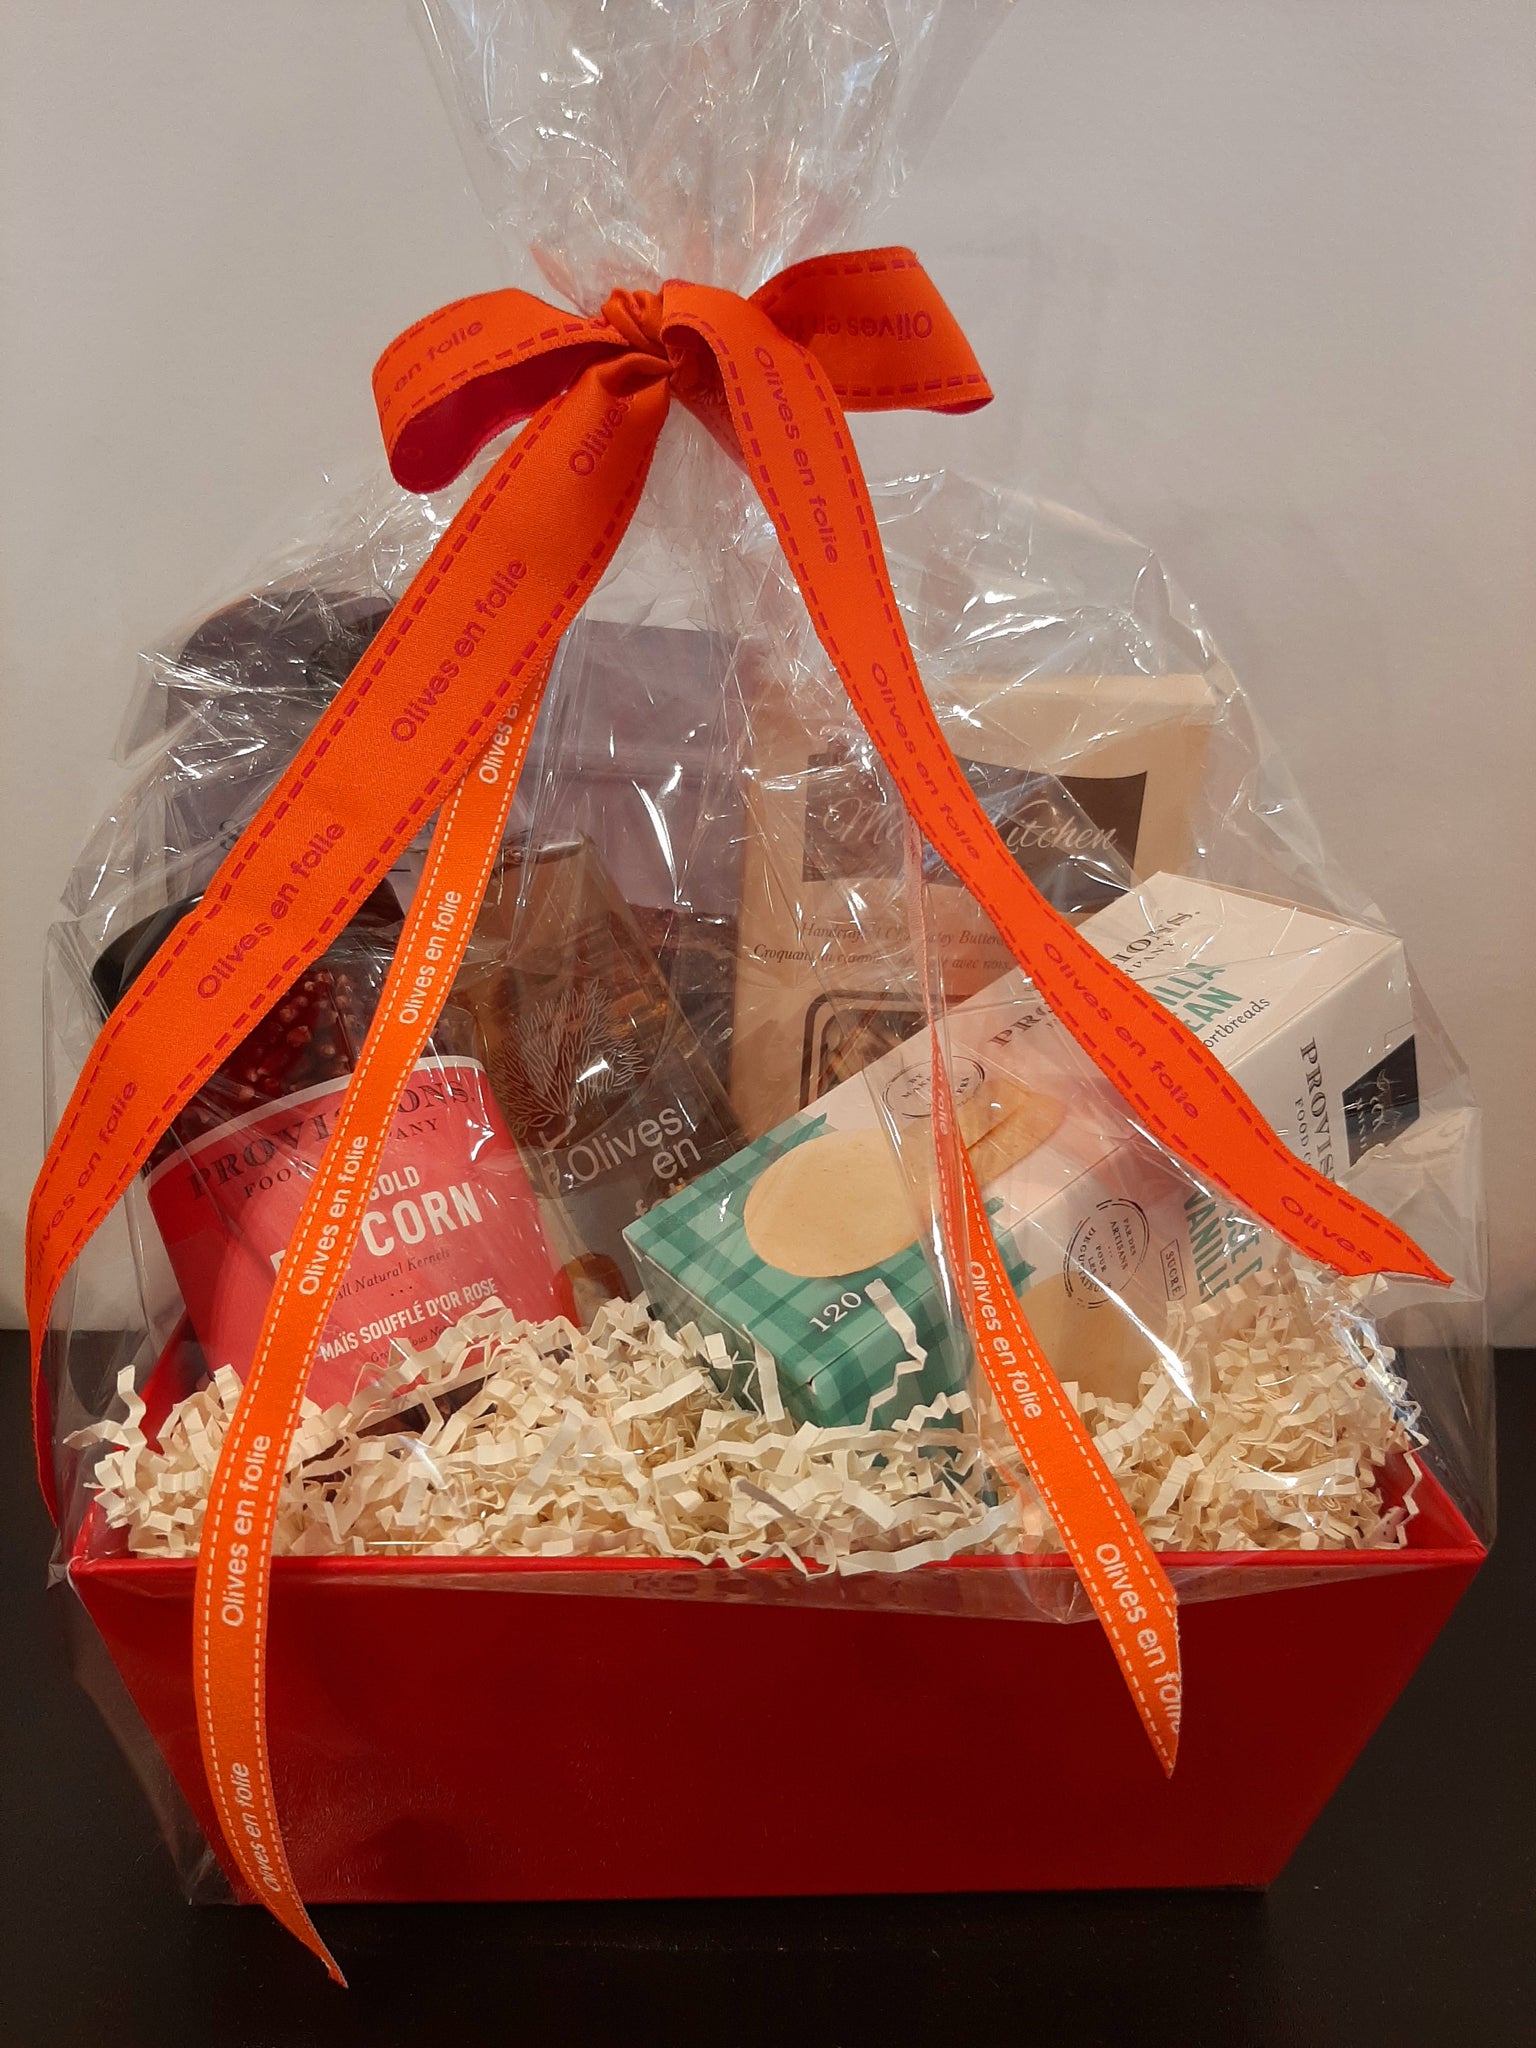 Treat Yourself Gift Basket (Small)